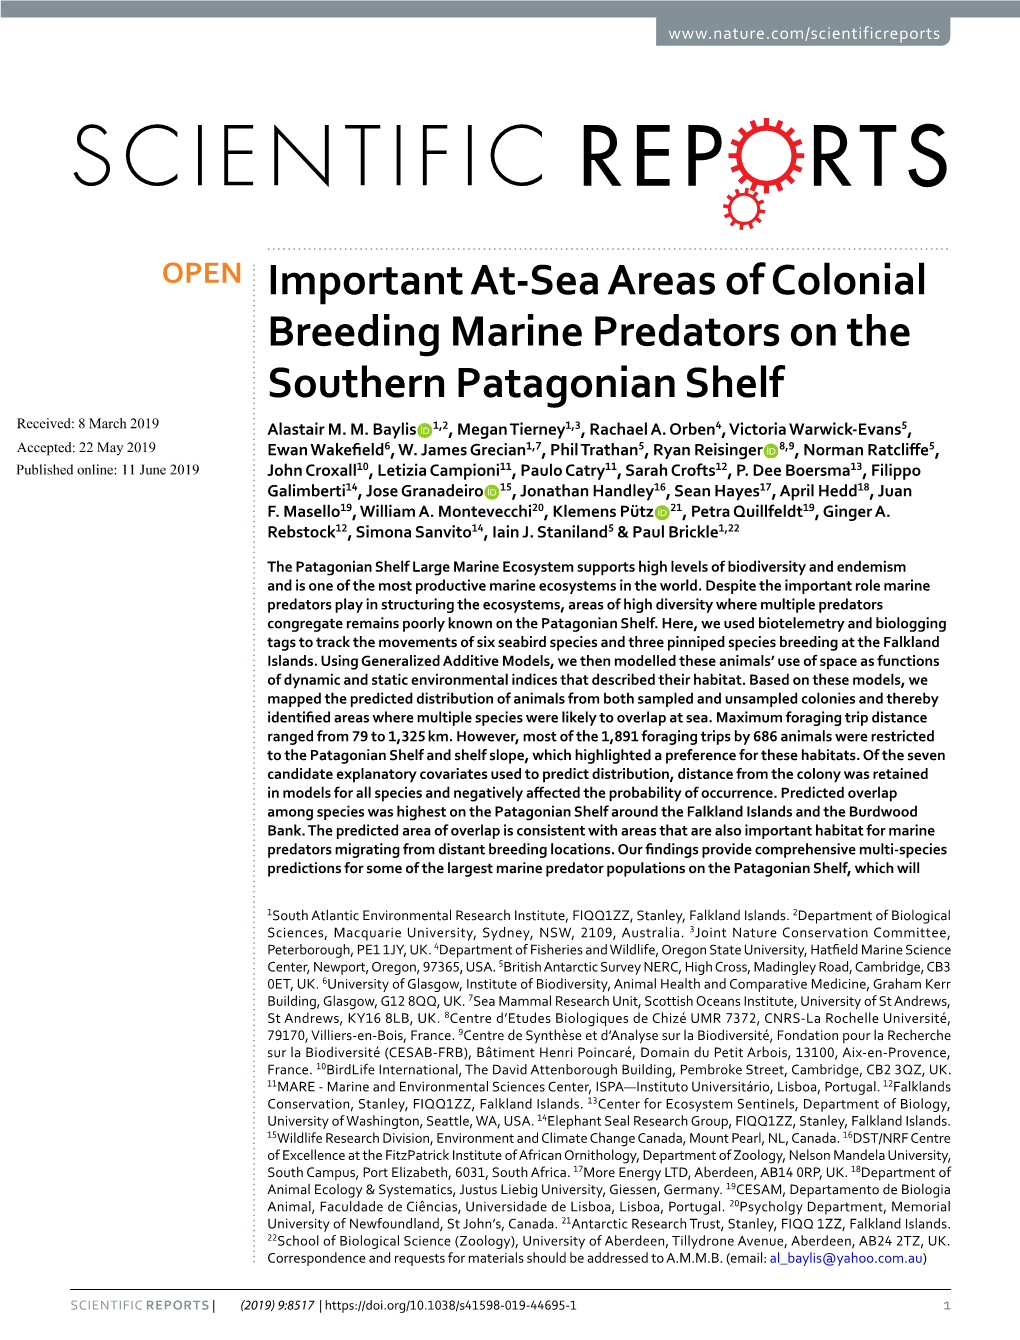 Important At-Sea Areas of Colonial Breeding Marine Predators on the Southern Patagonian Shelf Received: 8 March 2019 Alastair M